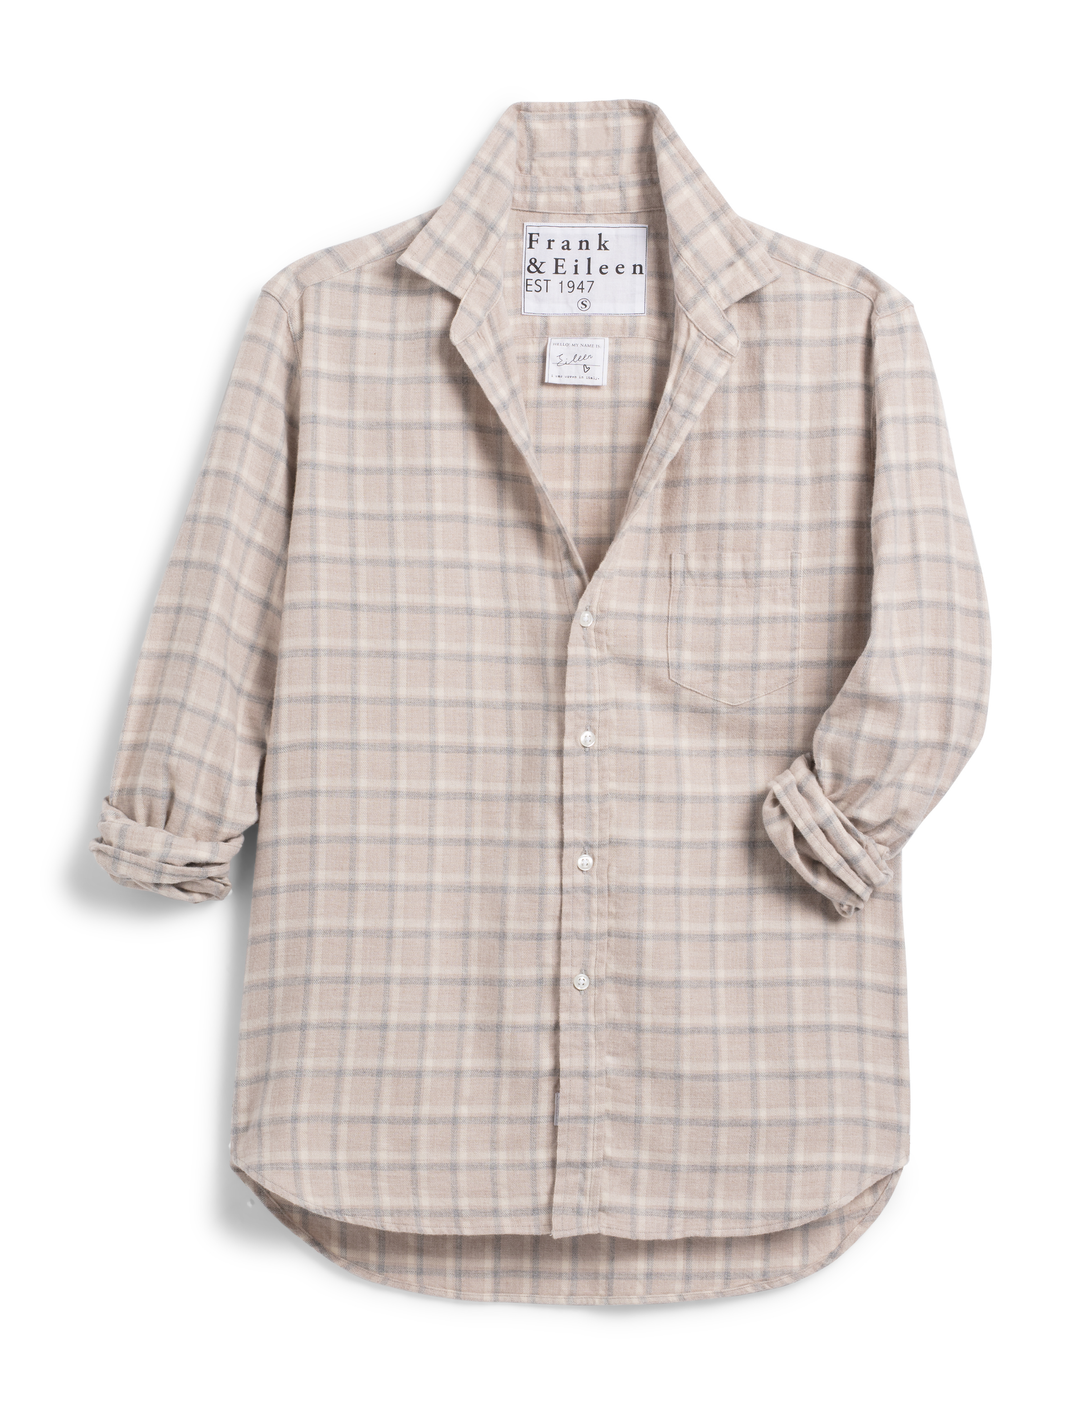 Frank & Eileen - Eileen Relaxed Button-Up Shirt in Sand, Gray, White Plaid